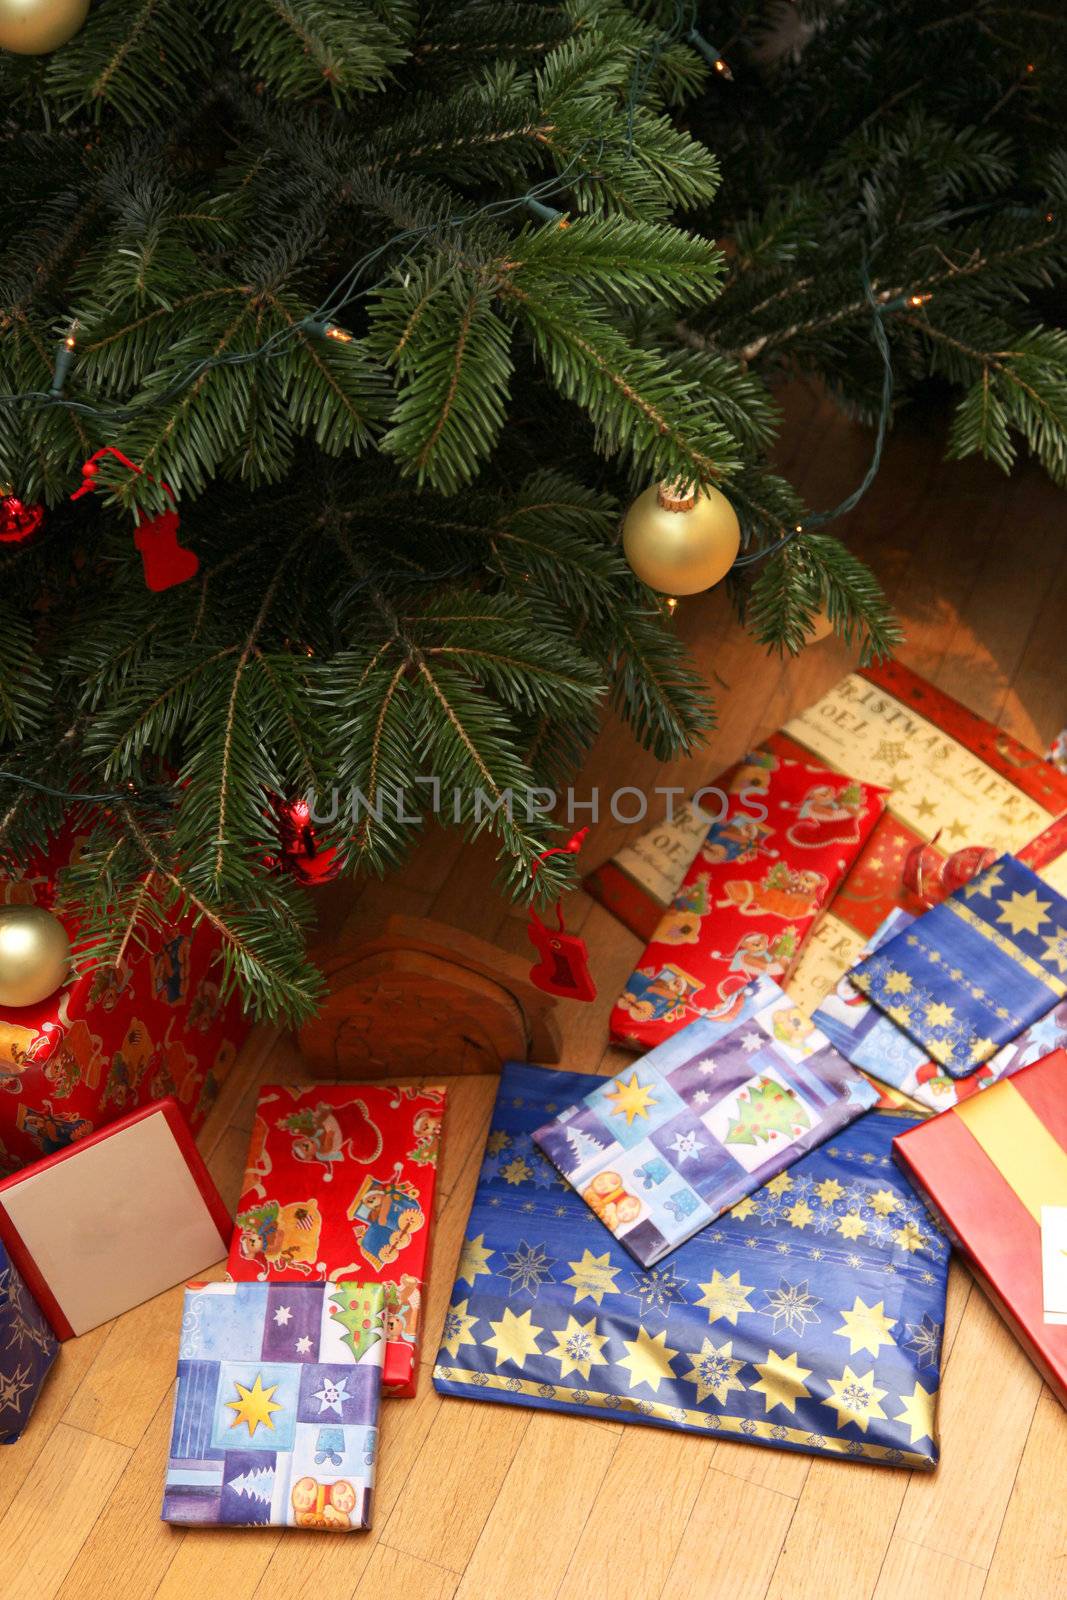 Christmas tree and gifts  by Farina6000